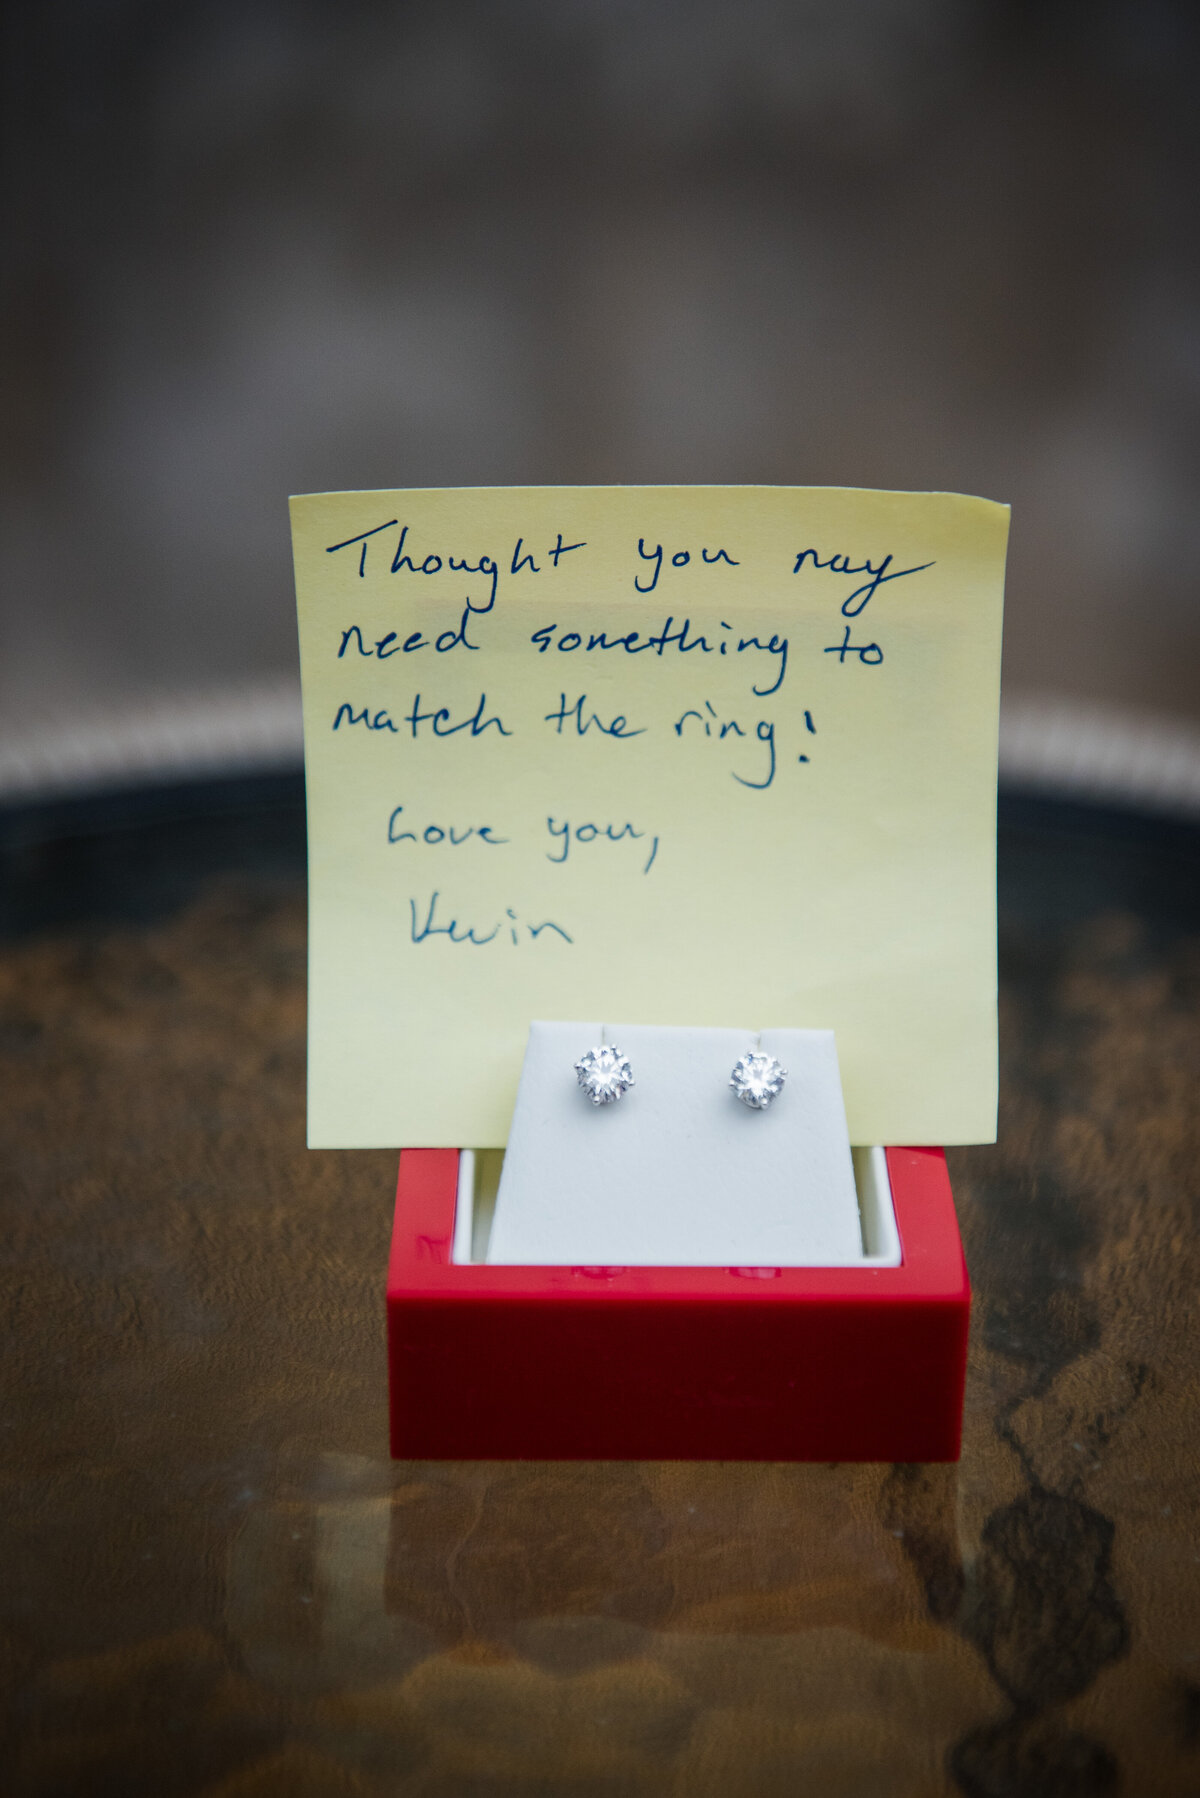 A cute note from a groom to a bride and a pair of earrings gifted by the groom.